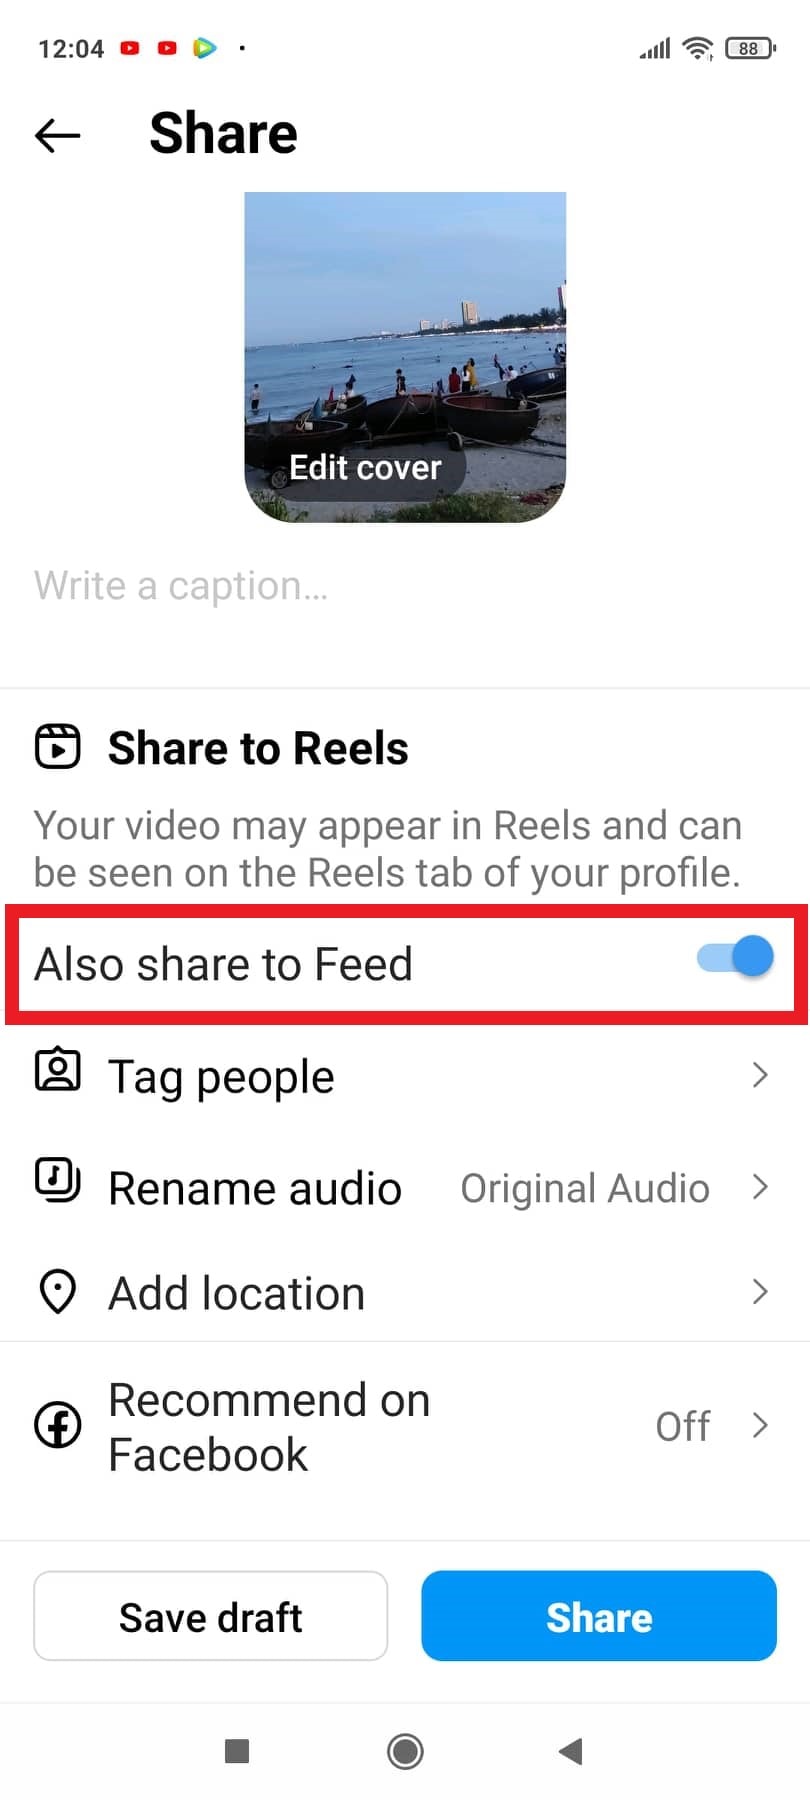 Toggle on Also share to Feed